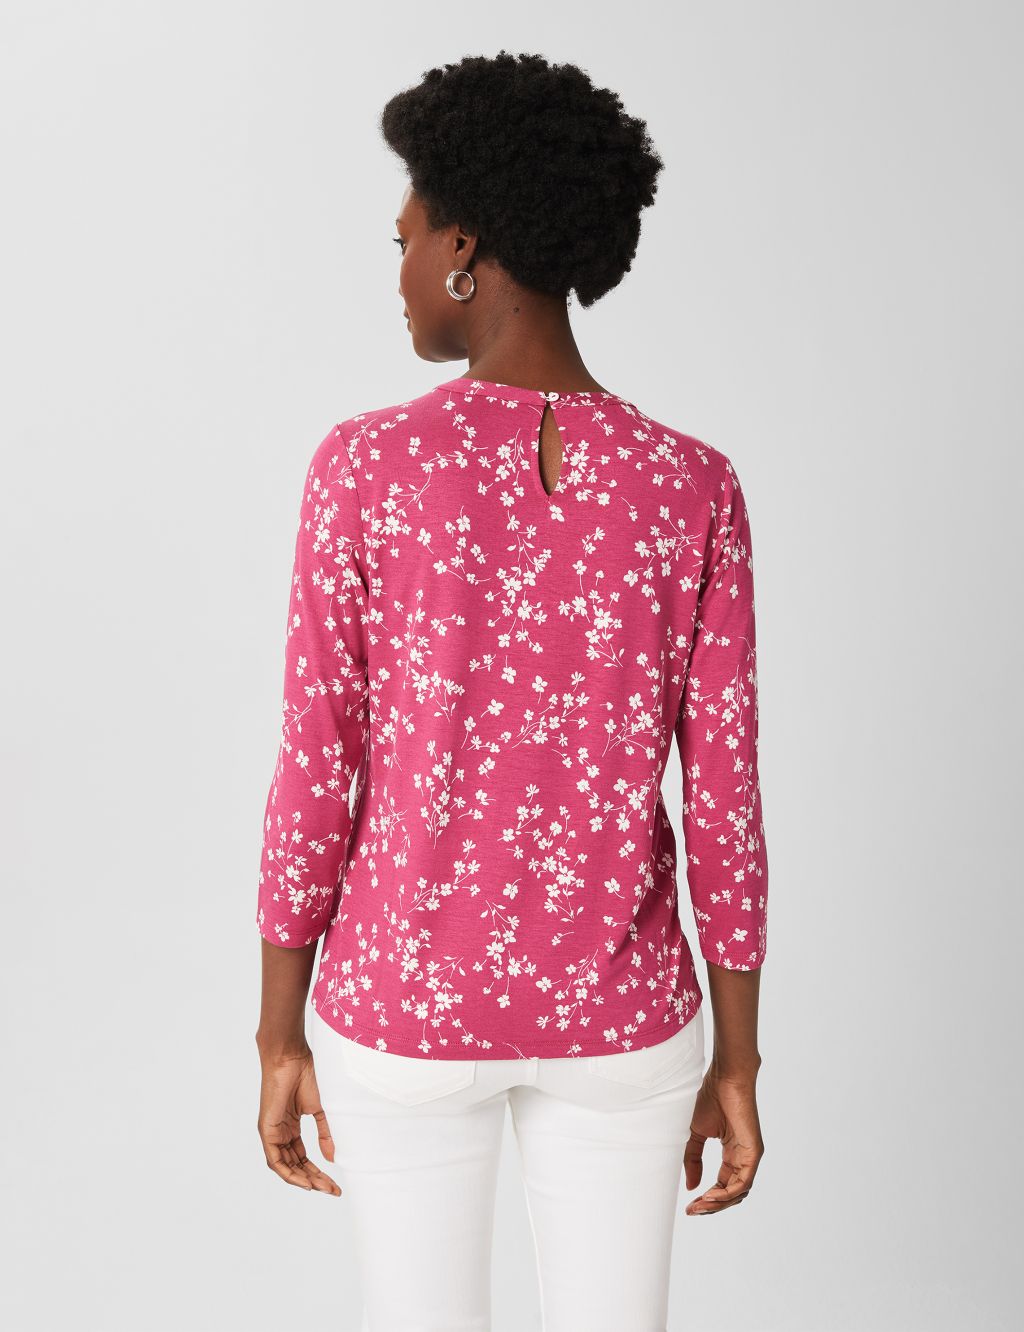 Floral Round Neck 3/4 Sleeve Top image 3